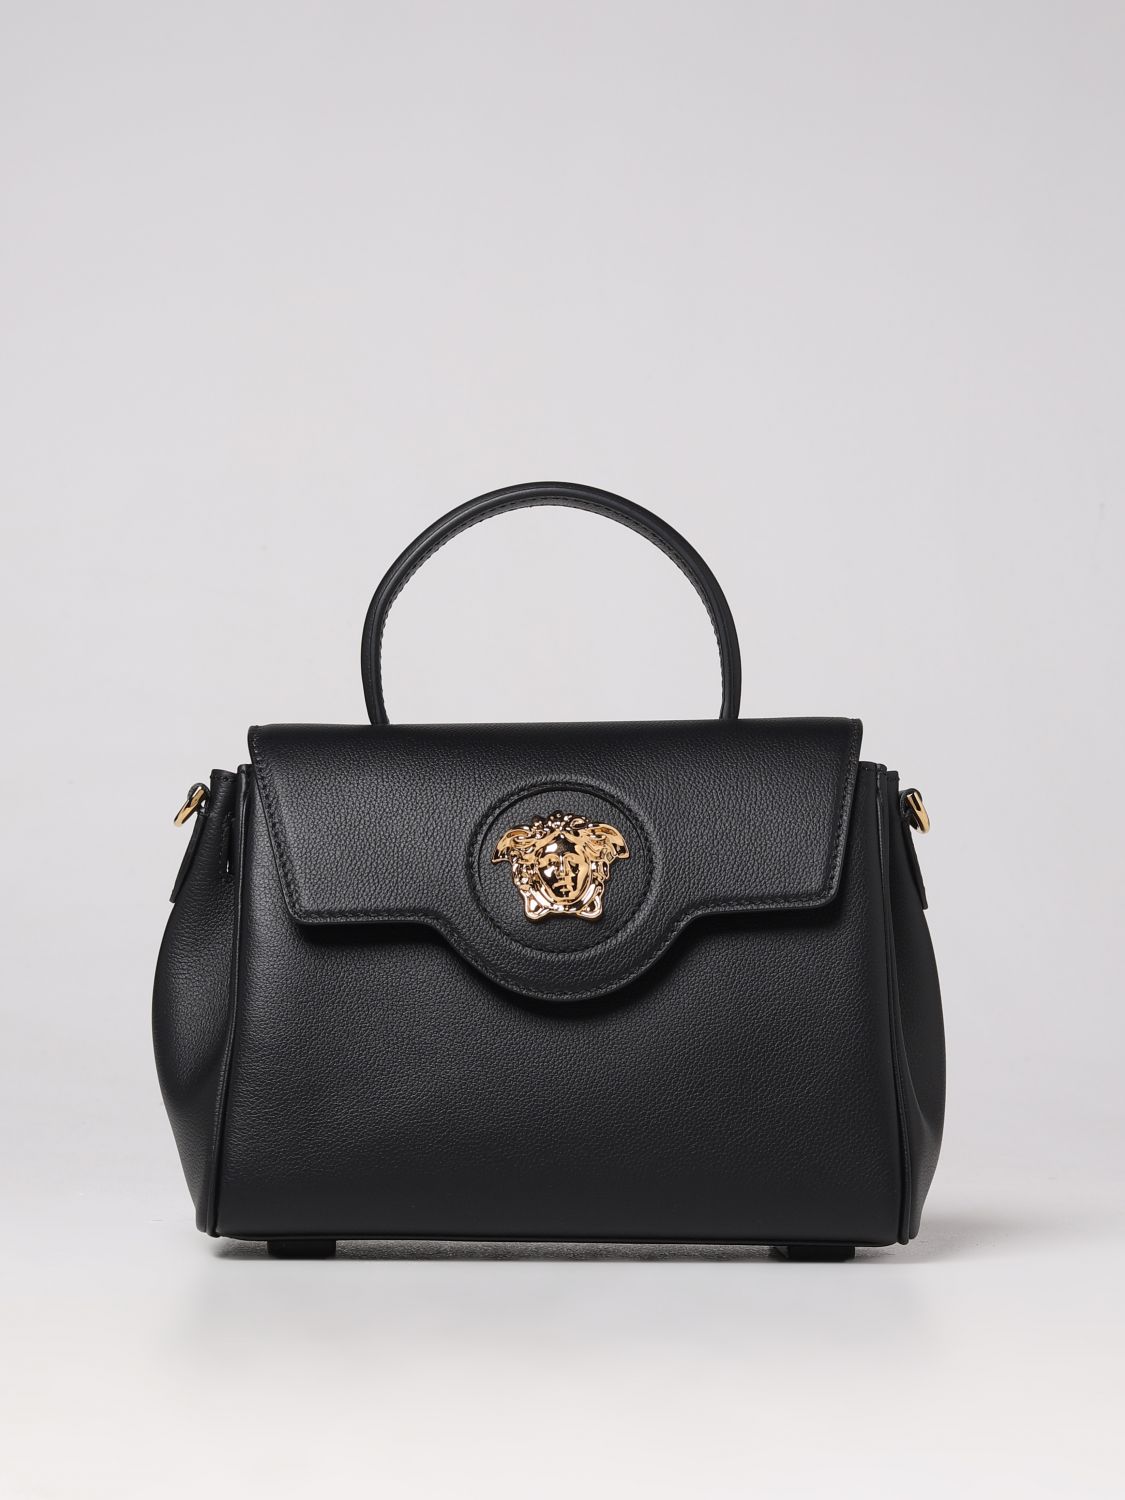 VERSACE BAG IN GRAINED LEATHER,375114002